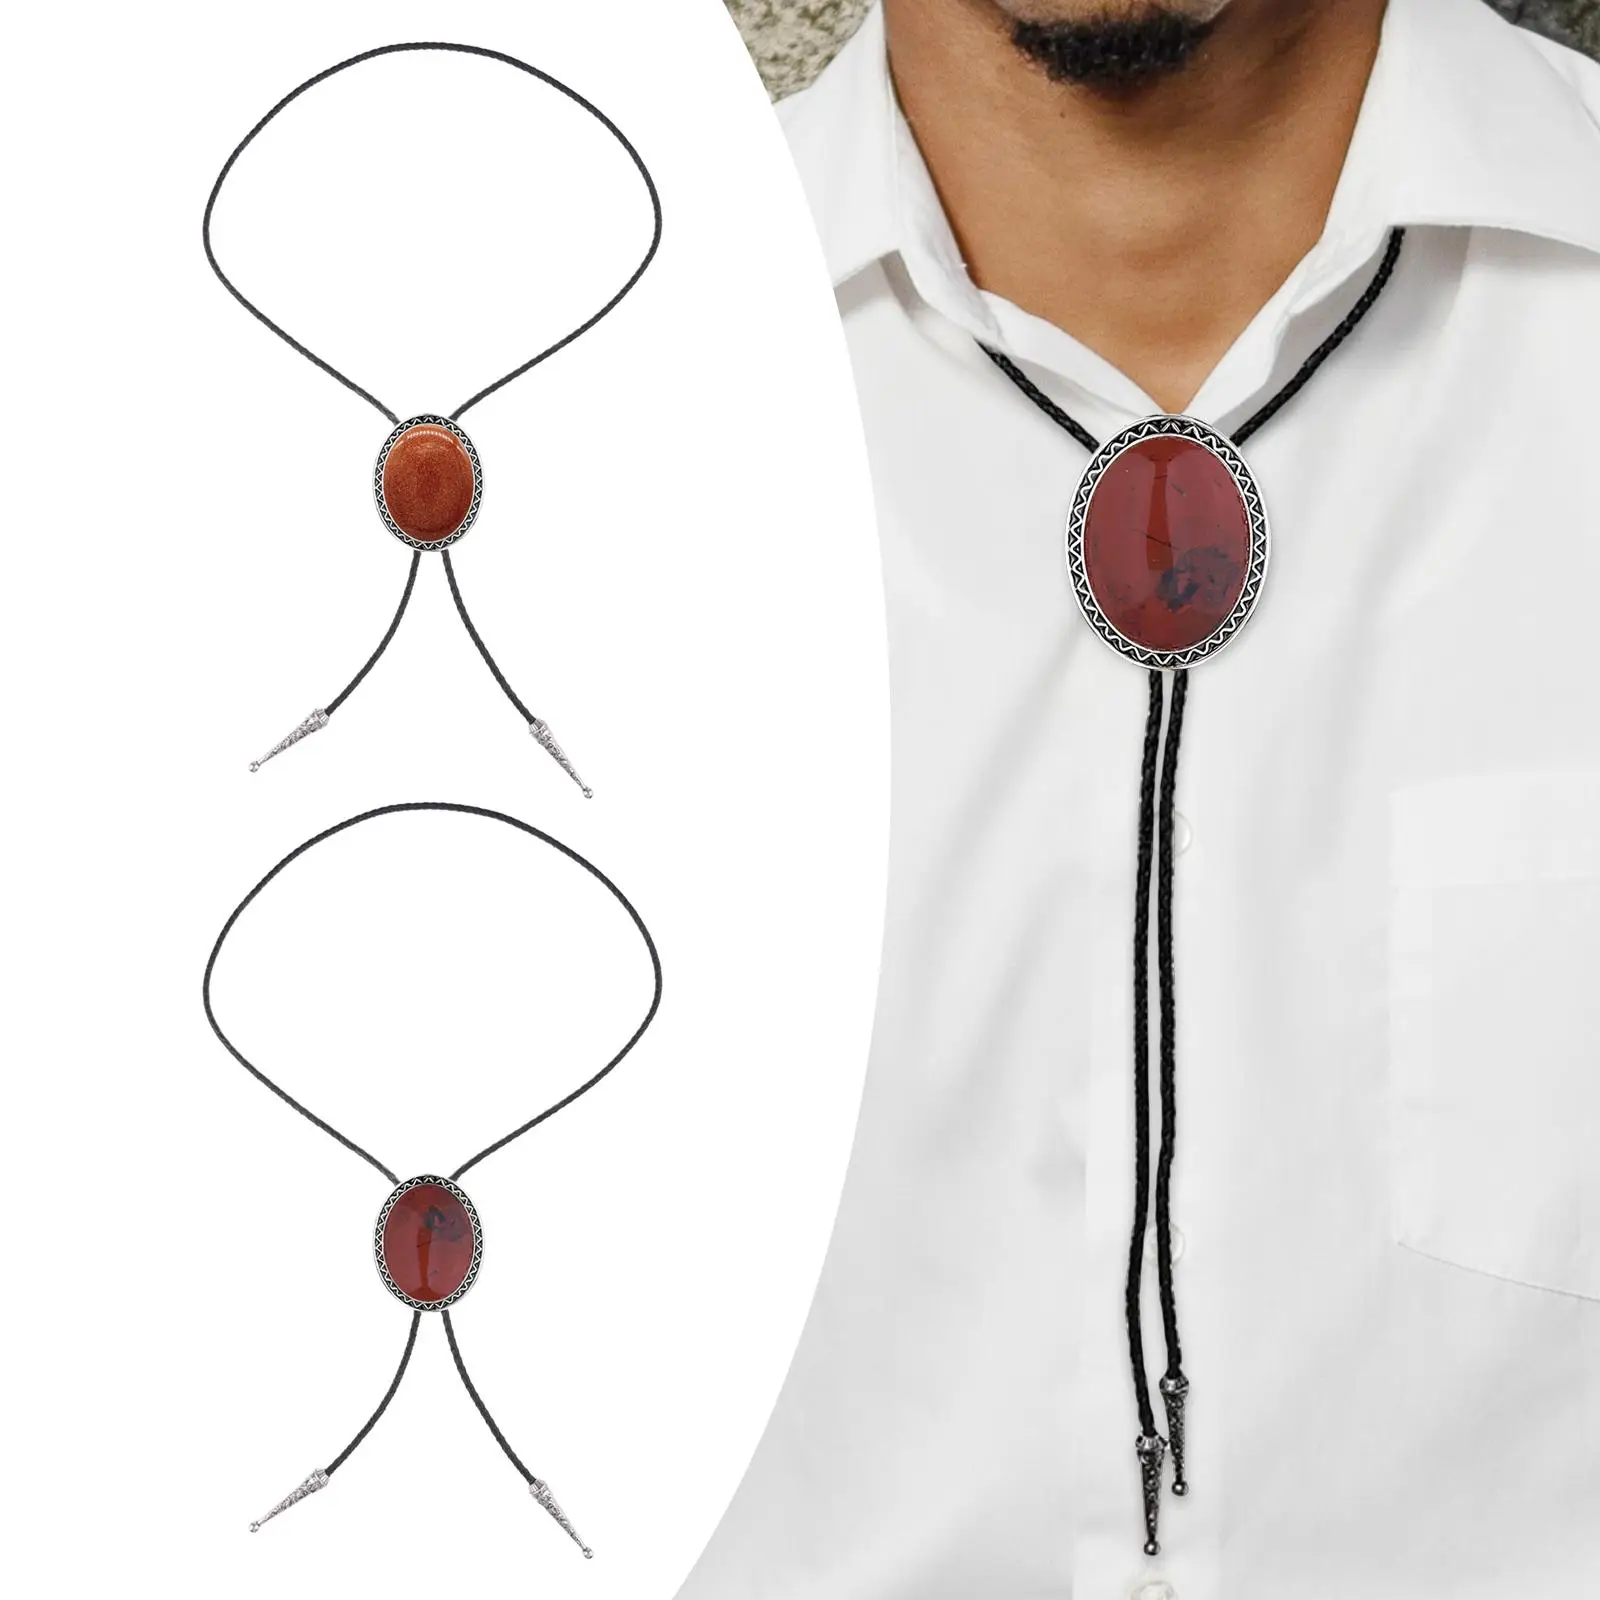 Cowboy Necktie Men Women Necklace Stylish Chain PU Leather Rope Vintage Style Bolo Tie for Banquet Prom Cosplay Costume Wedding